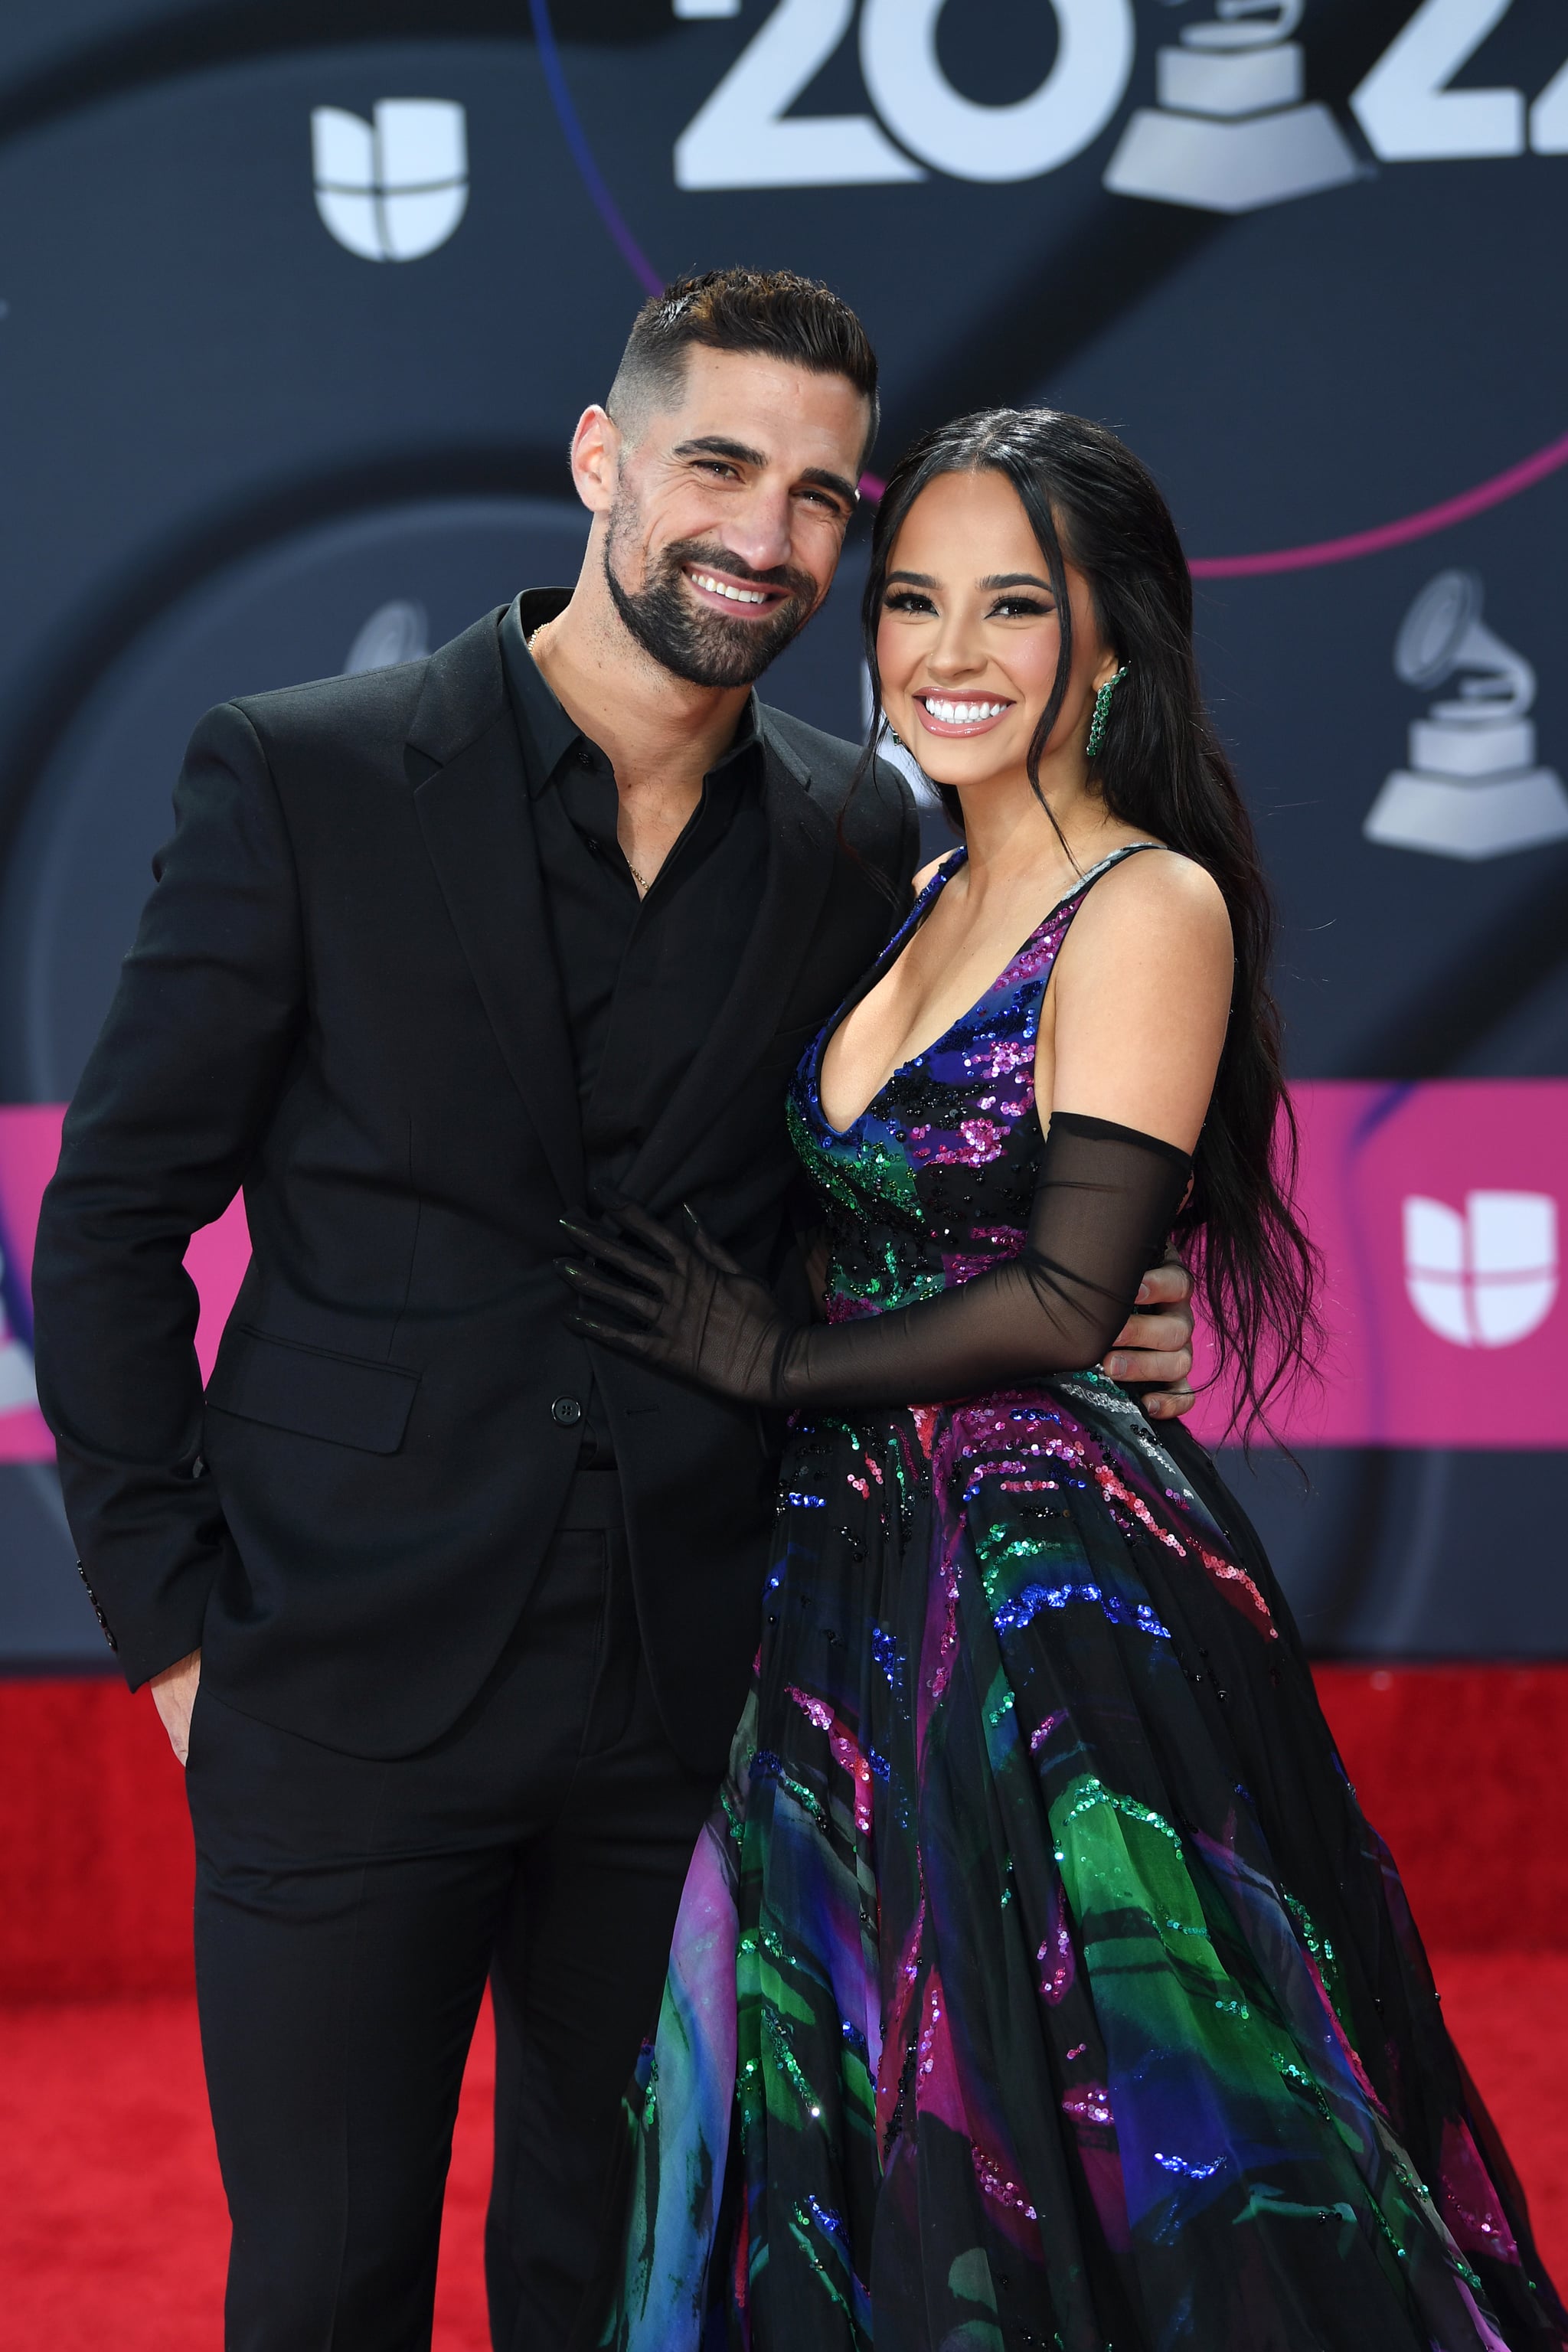 LAS VEGAS, NEVADA - NOVEMBER 17: (L-R) Sebastian Lletget and Becky G attend The 23rd Annual Latin Grammy Awards at Michelob ULTRA Arena on November 17, 2022 in Las Vegas, Nevada. (Photo by Denise Truscello/Getty Images for The Latin Recording Academy)